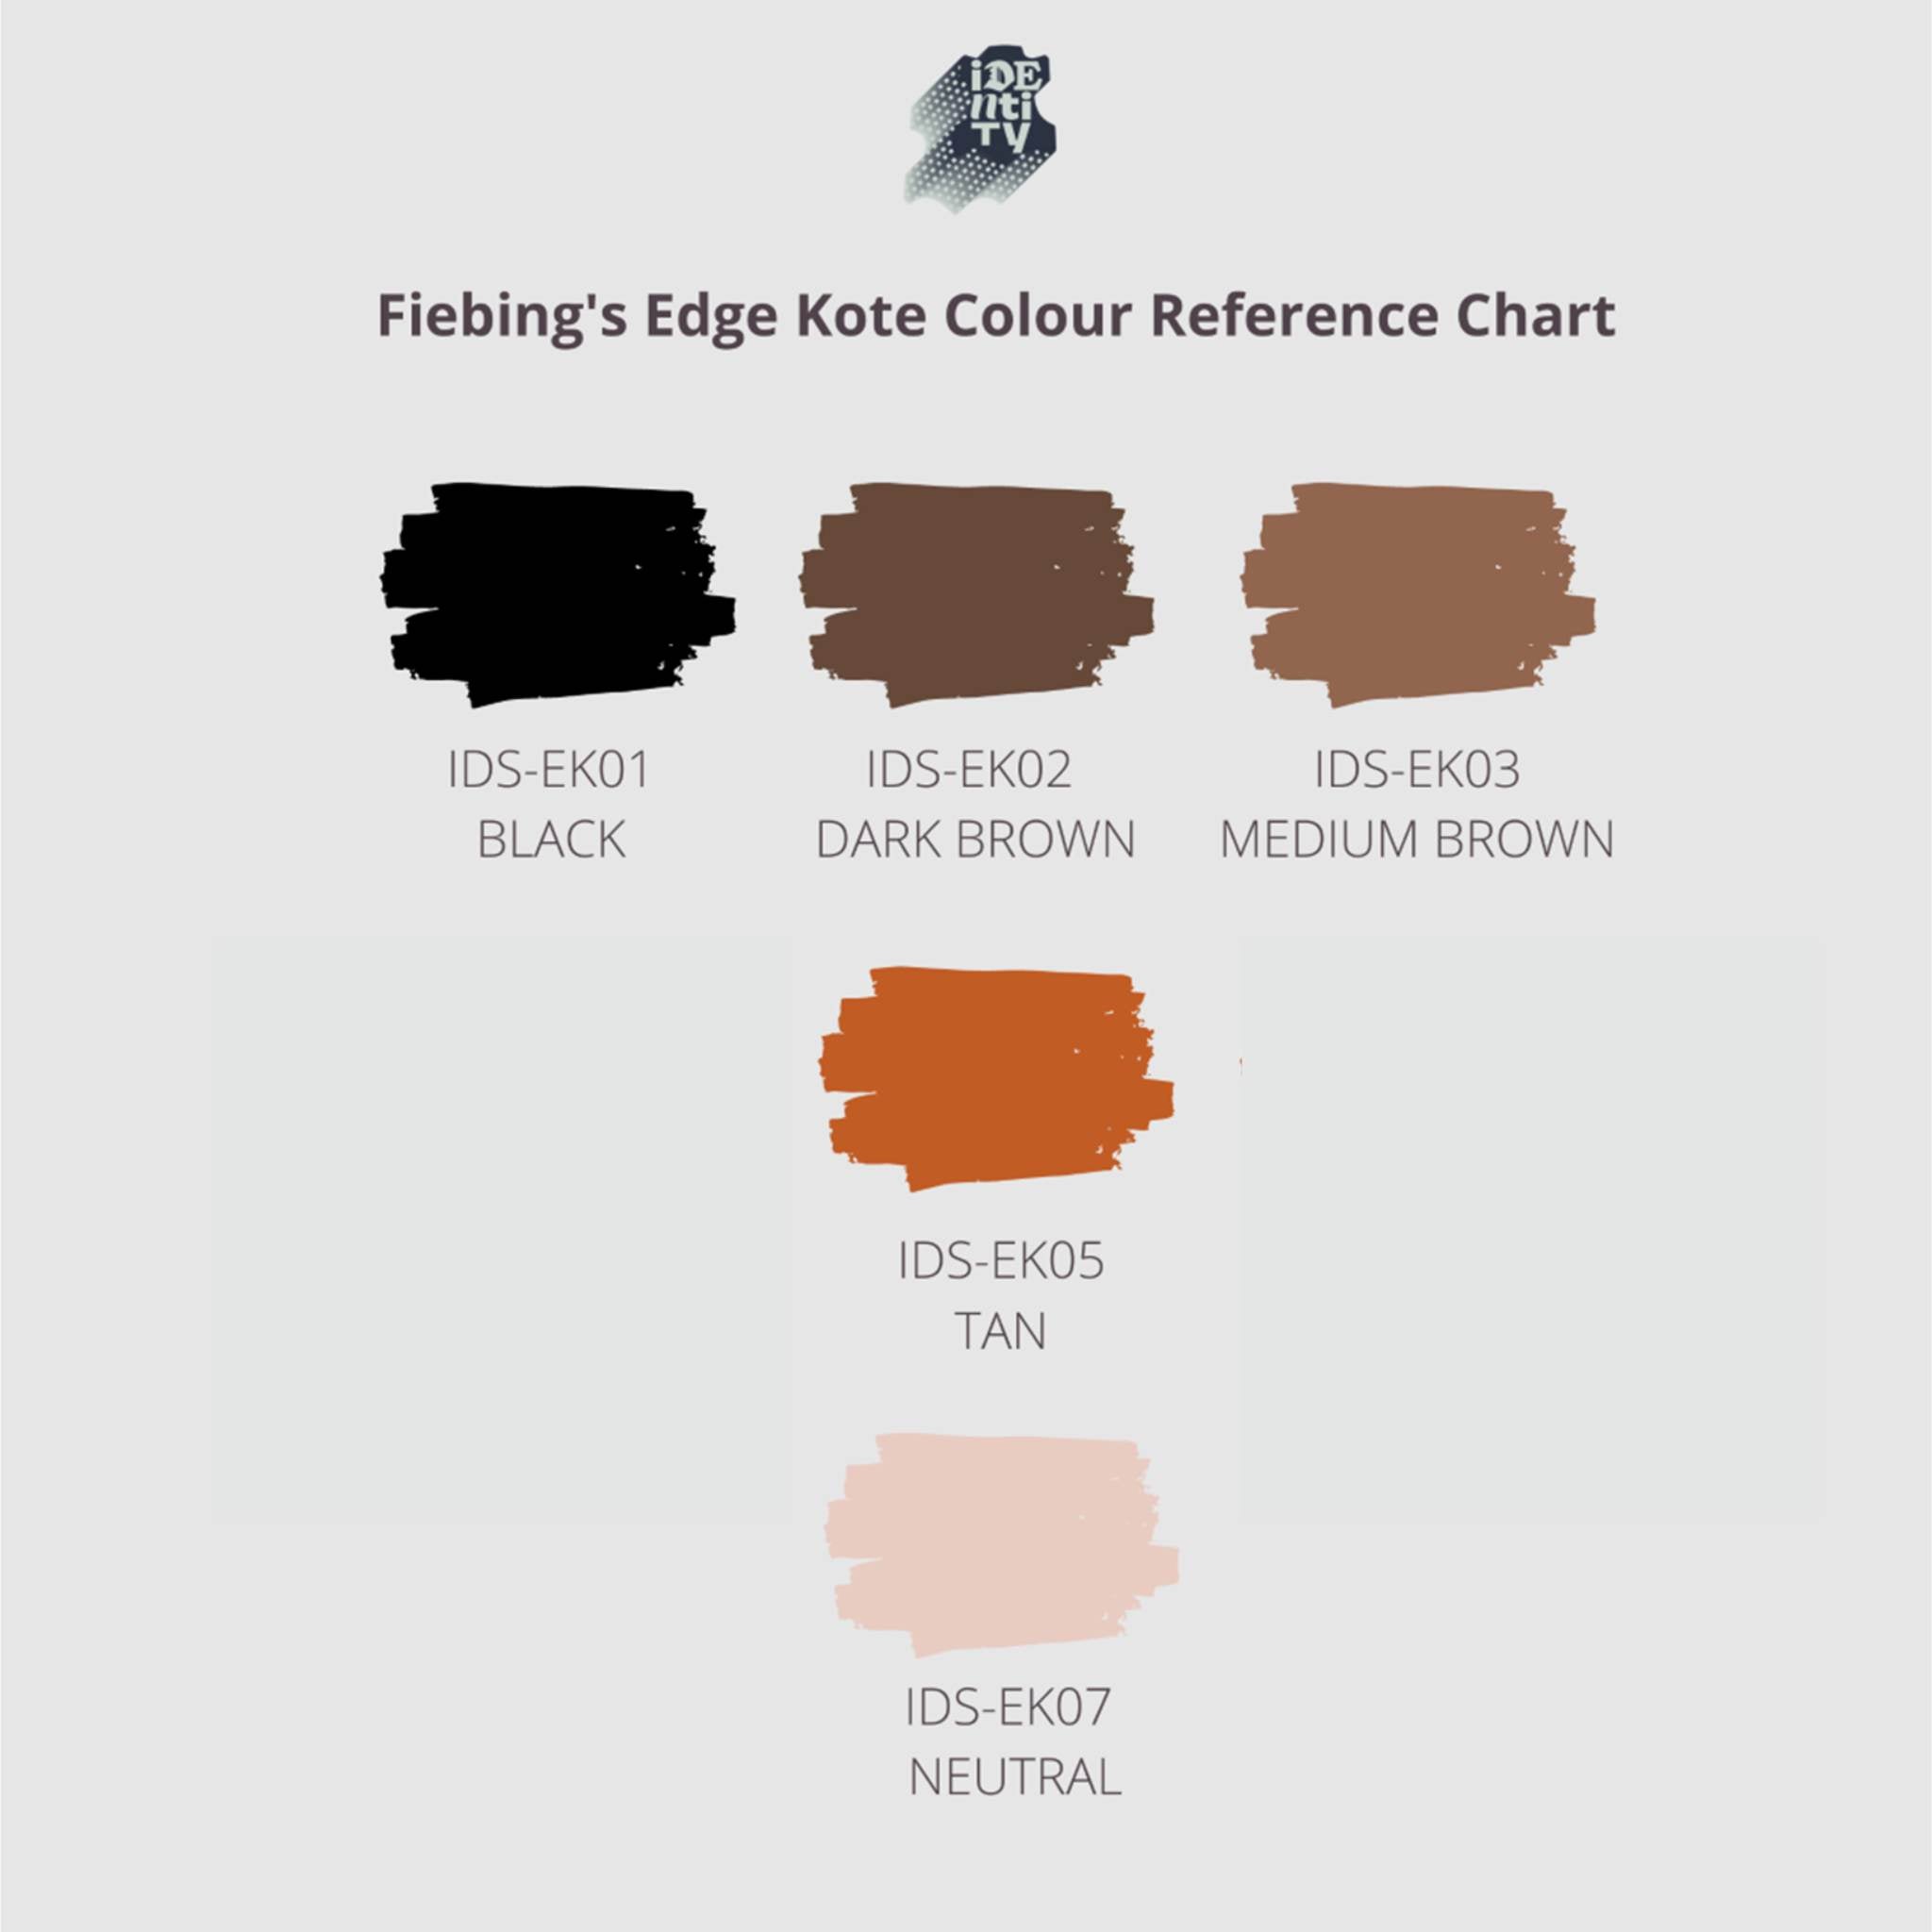 Colour Chart - Fiebing's Edge Kote are a tried and tested product to give a professional edge to your leatherwork projects.